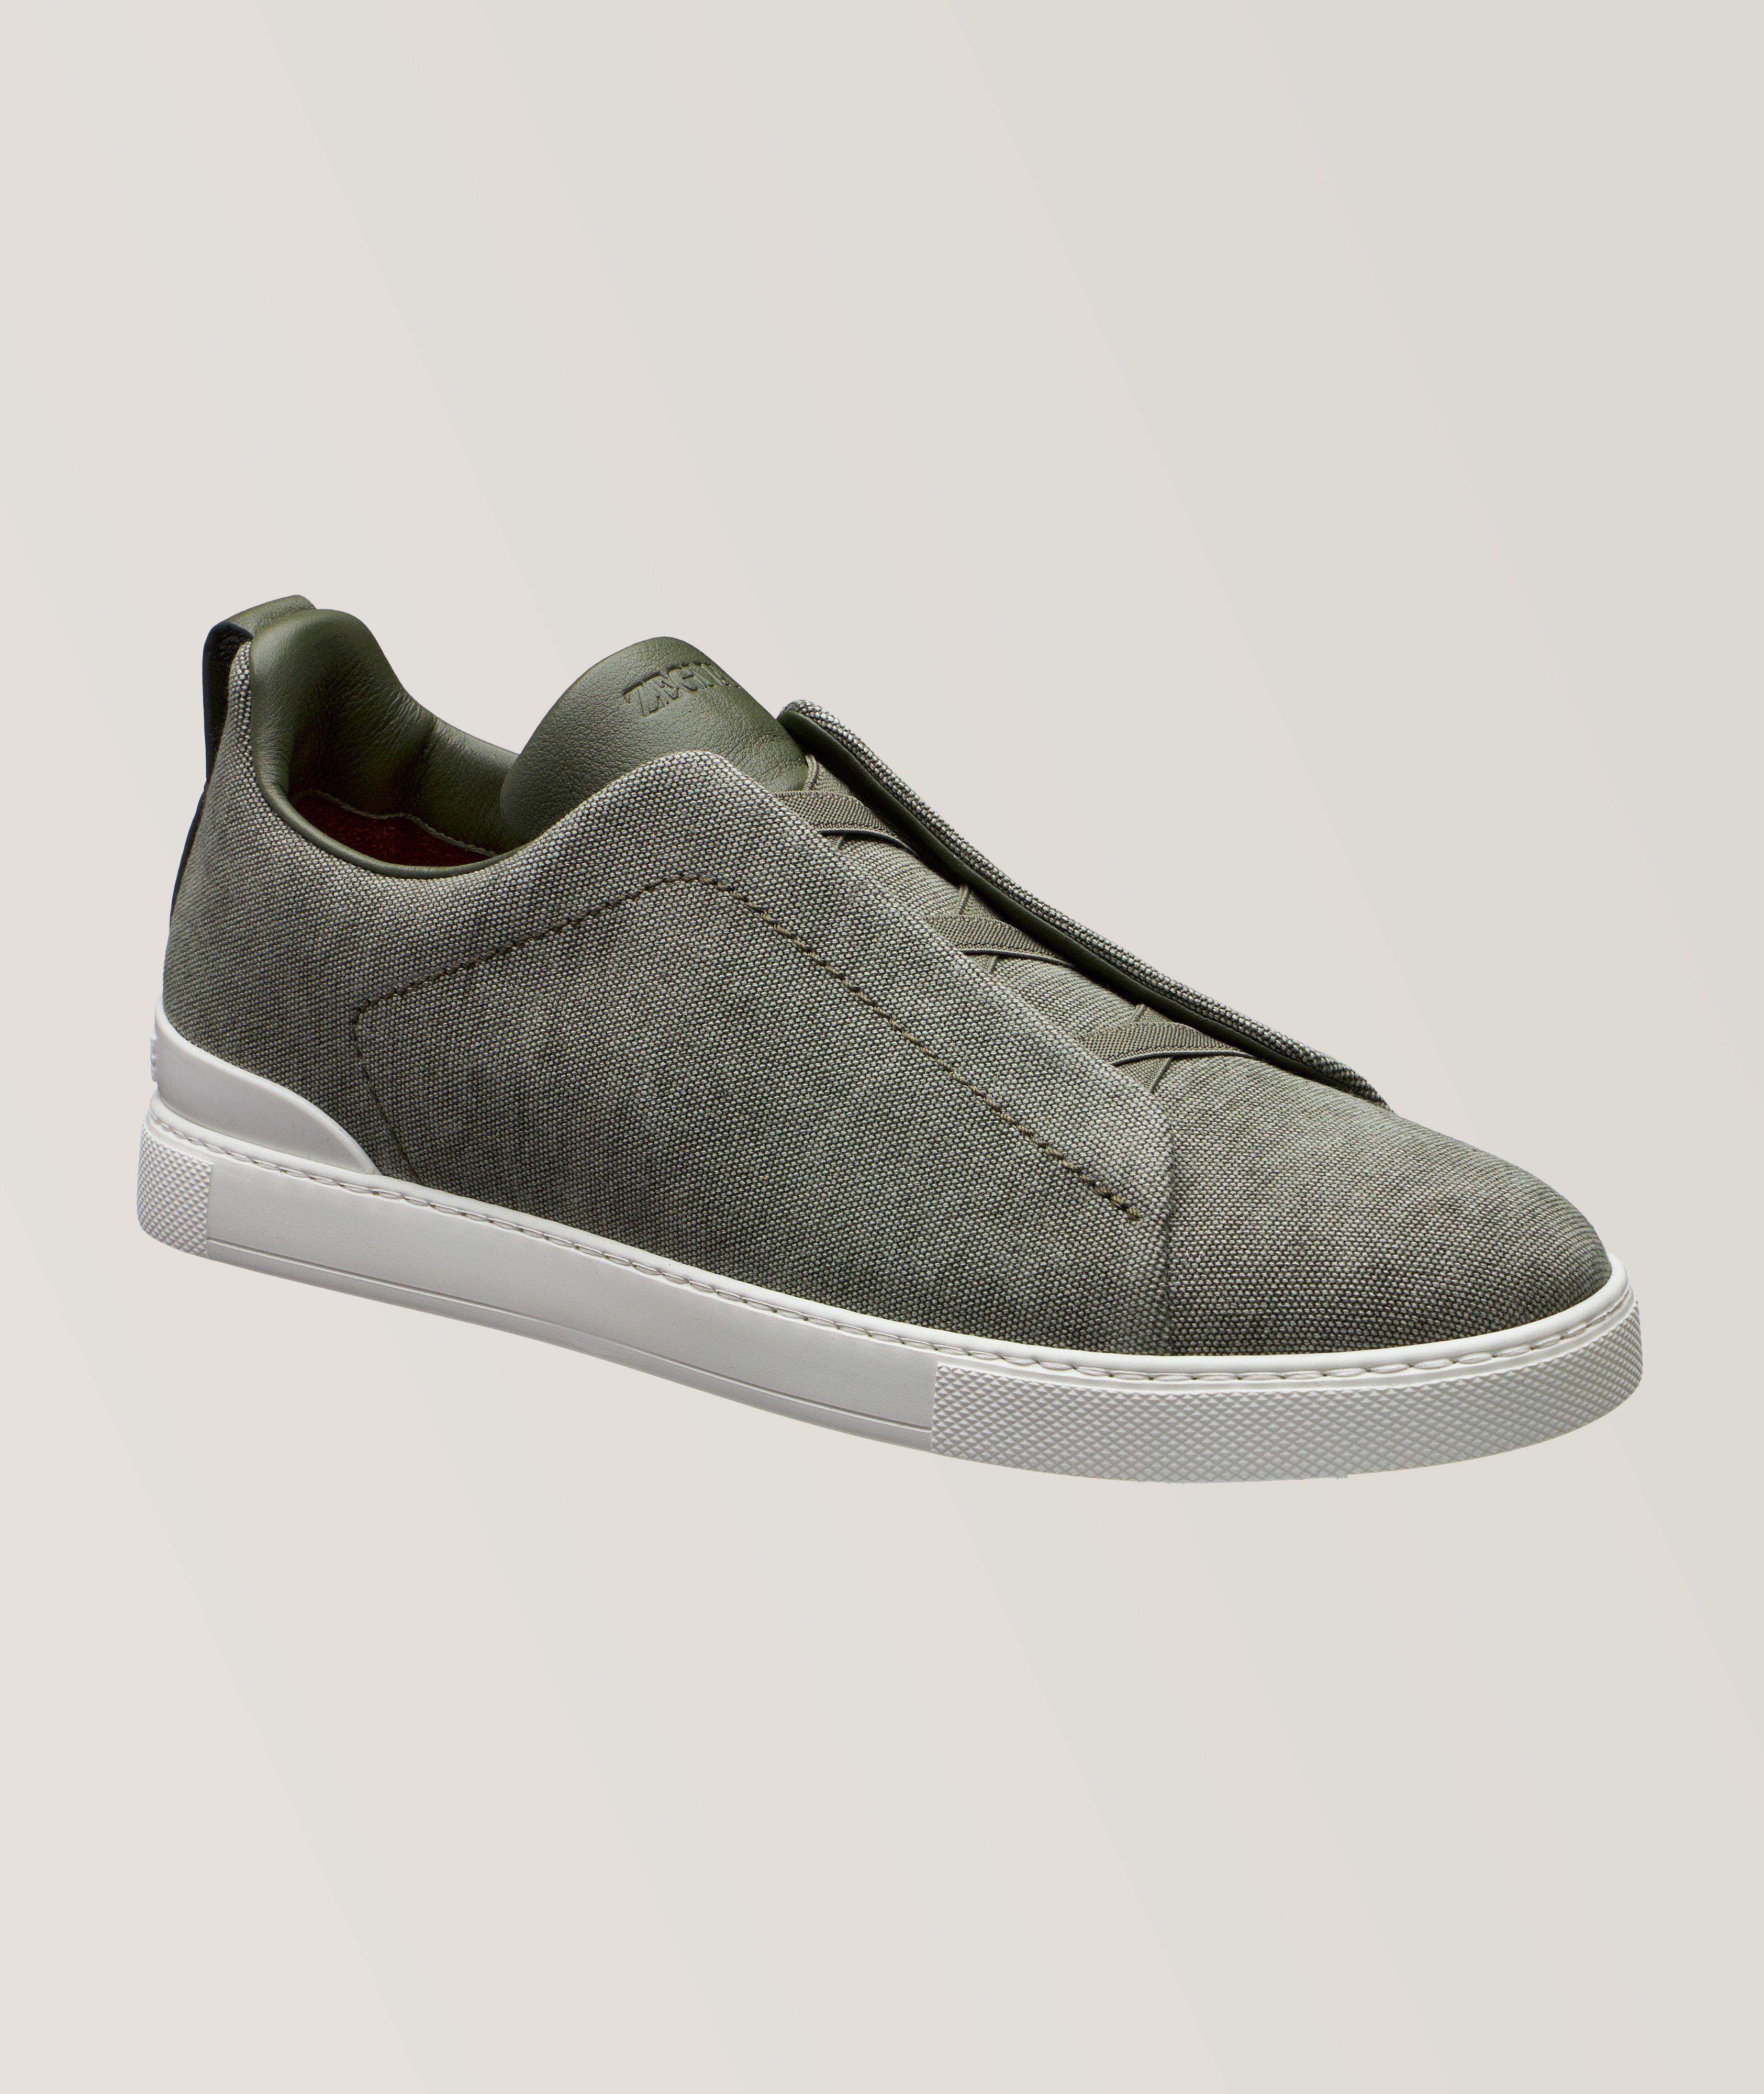 Triple Stitch Canvas Slip-On Sneakers image 0